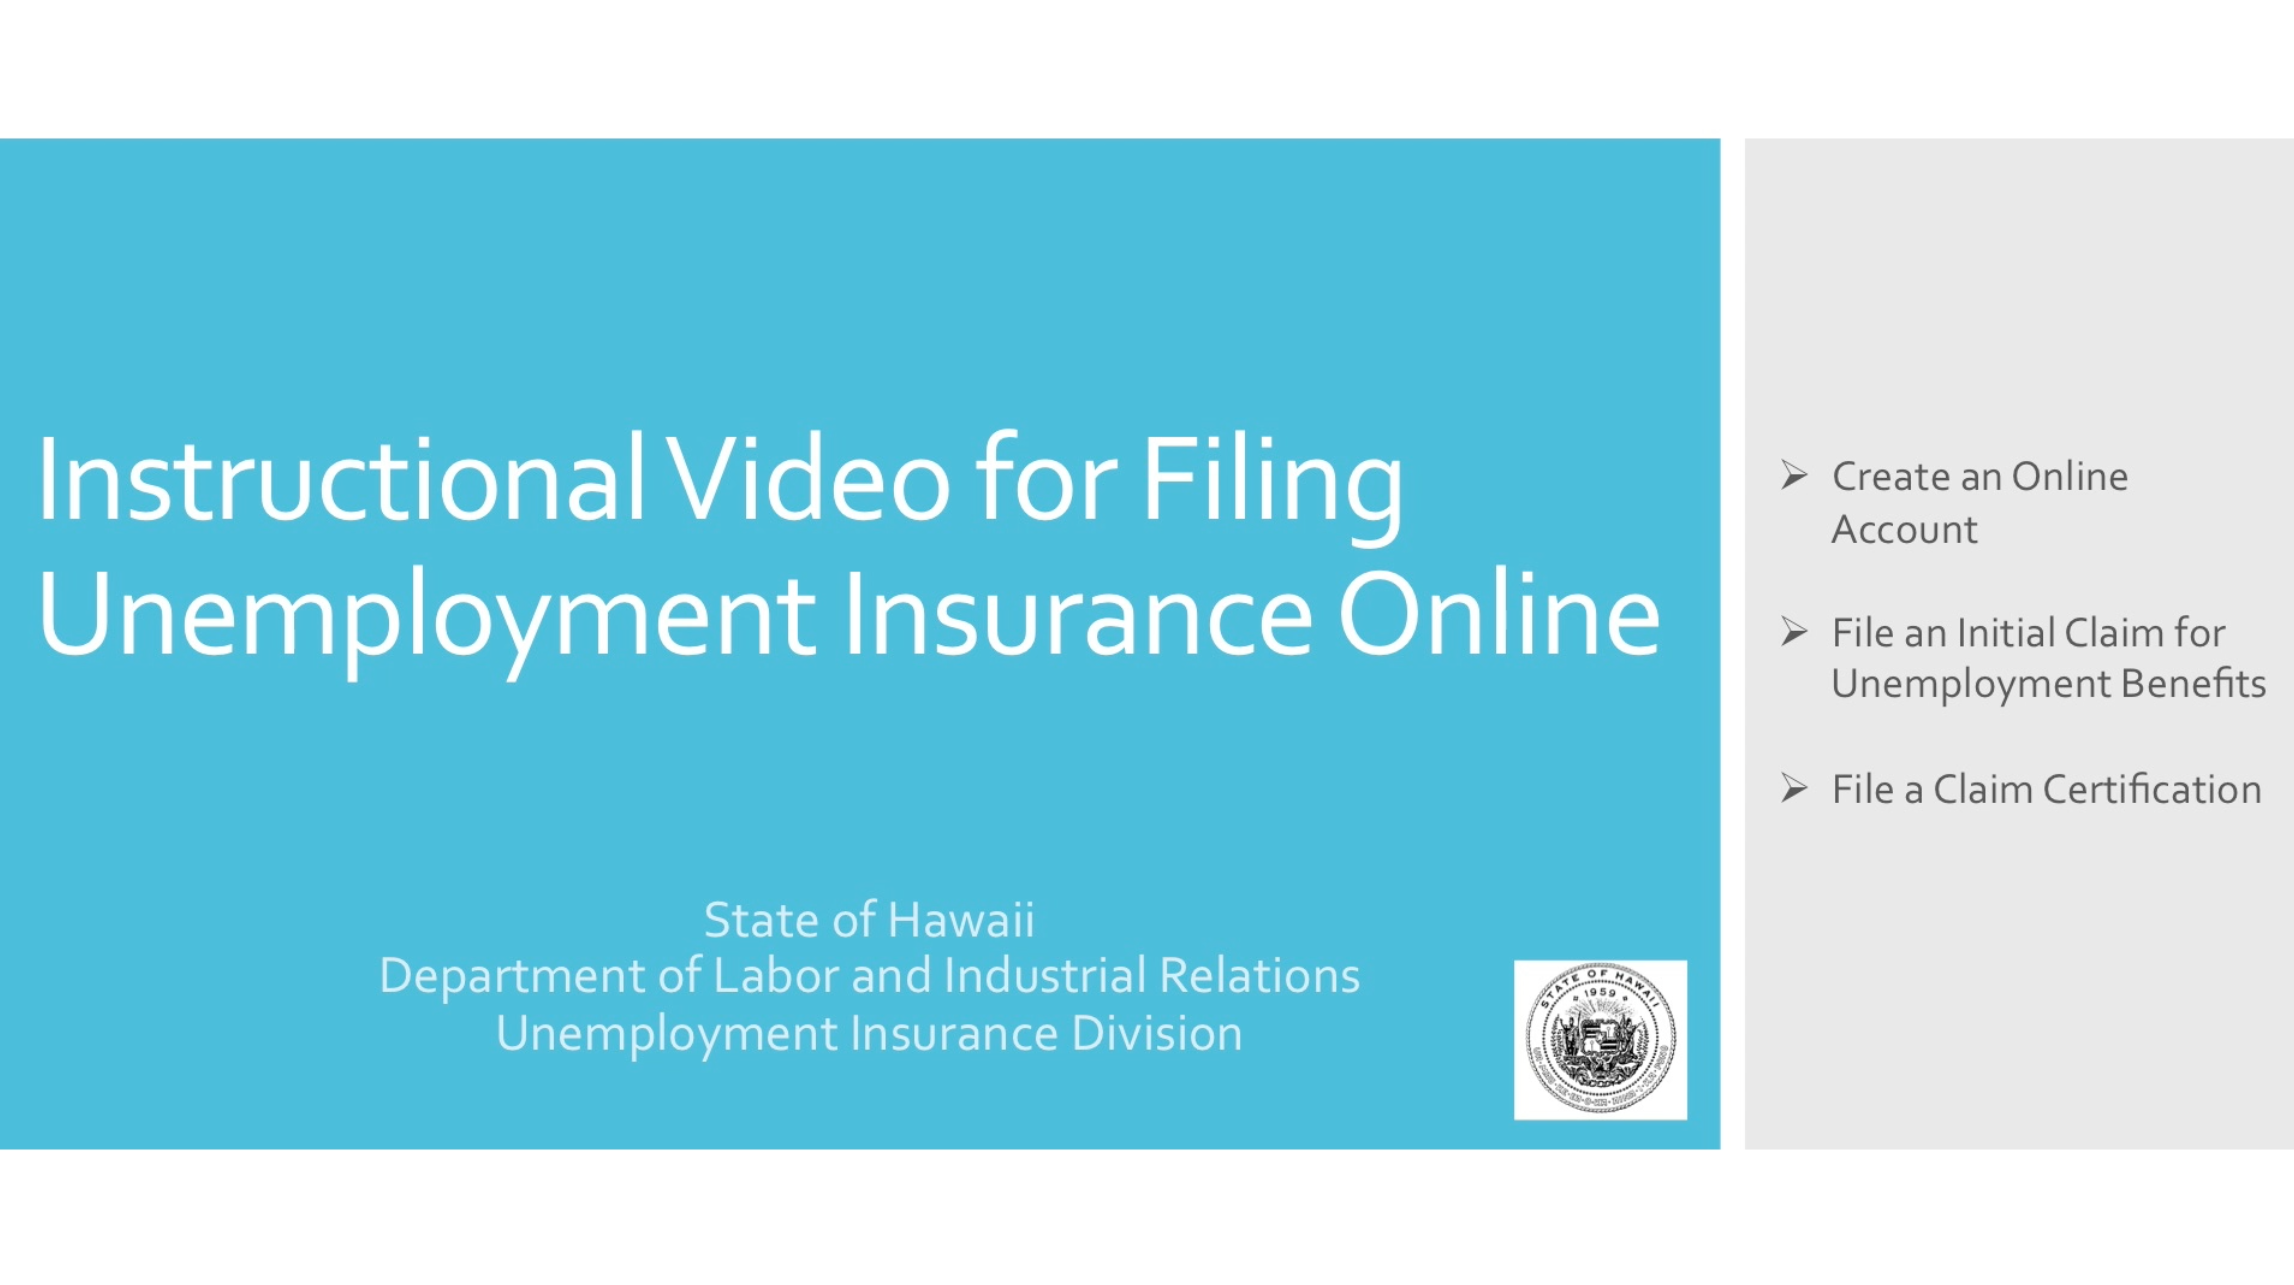 Instructional Video for Filing Unemployment Insurance Online